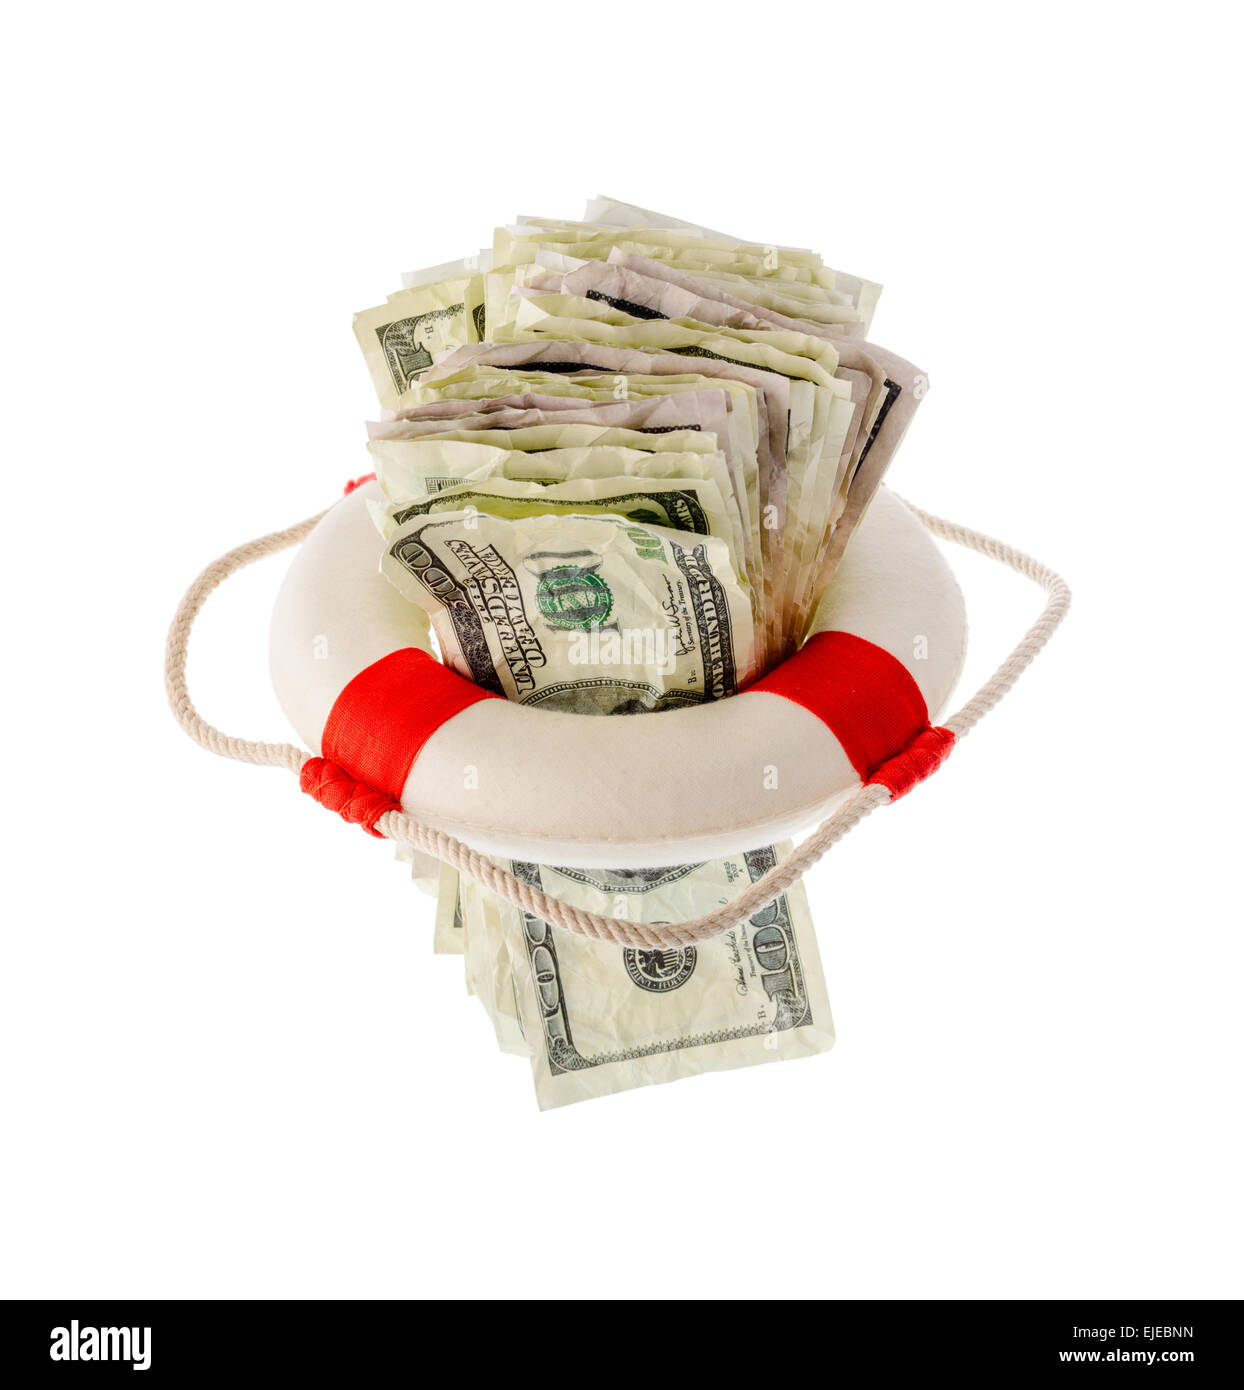 Money and finance: saving dollars, pack of one-hundred dollar bills inside a lifebuoy. Isolated on white background. Not a real Stock Photo